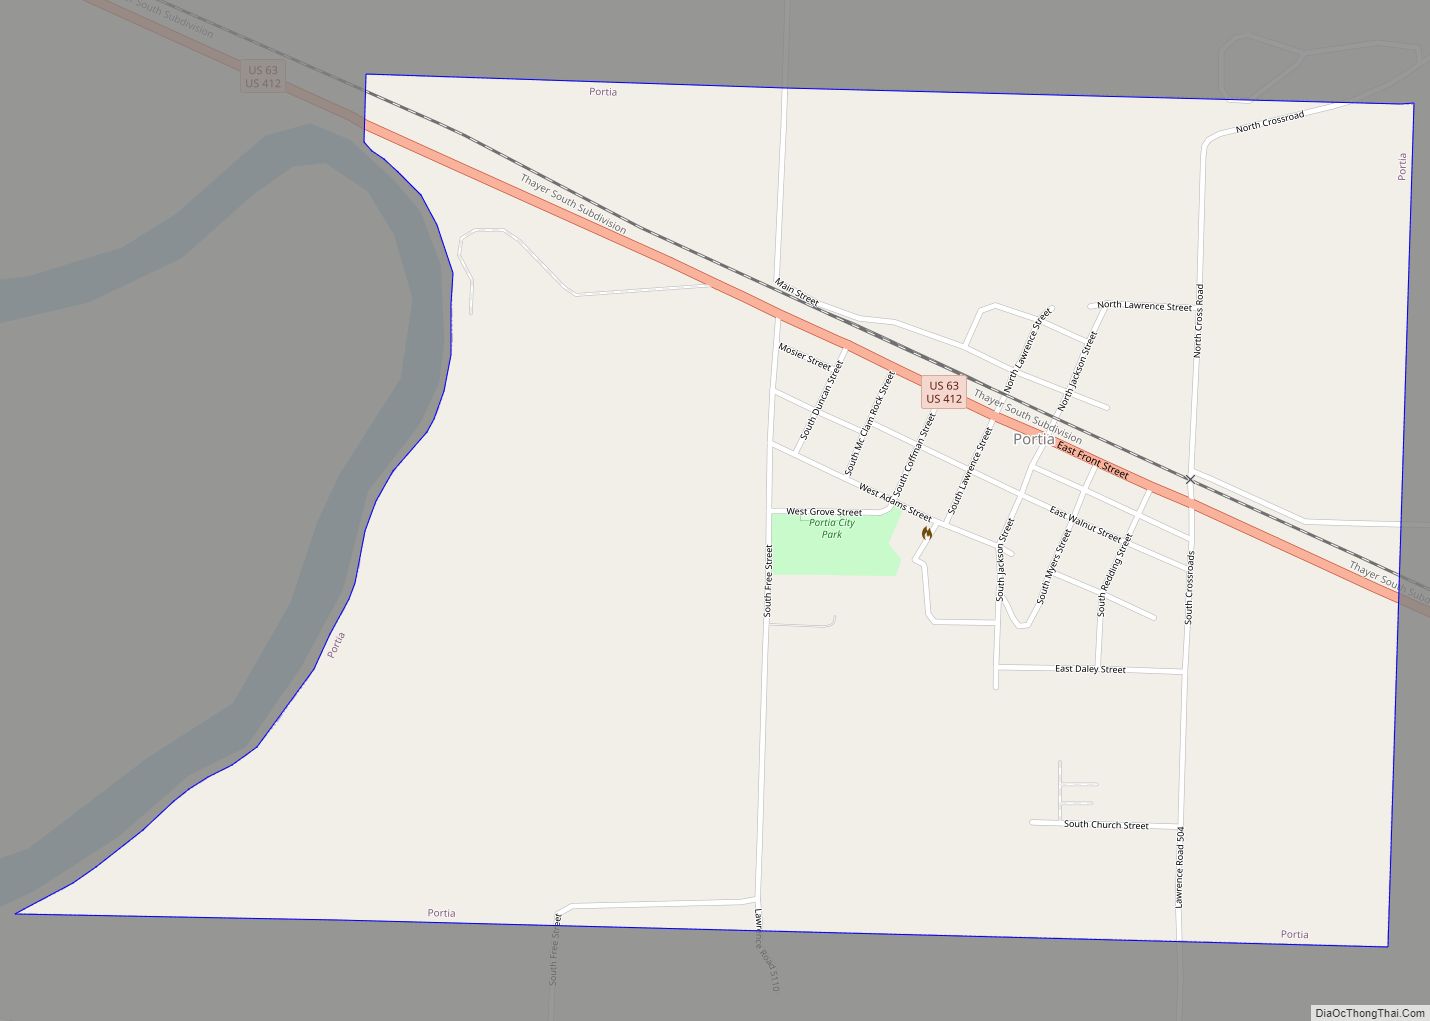 Map of Portia town